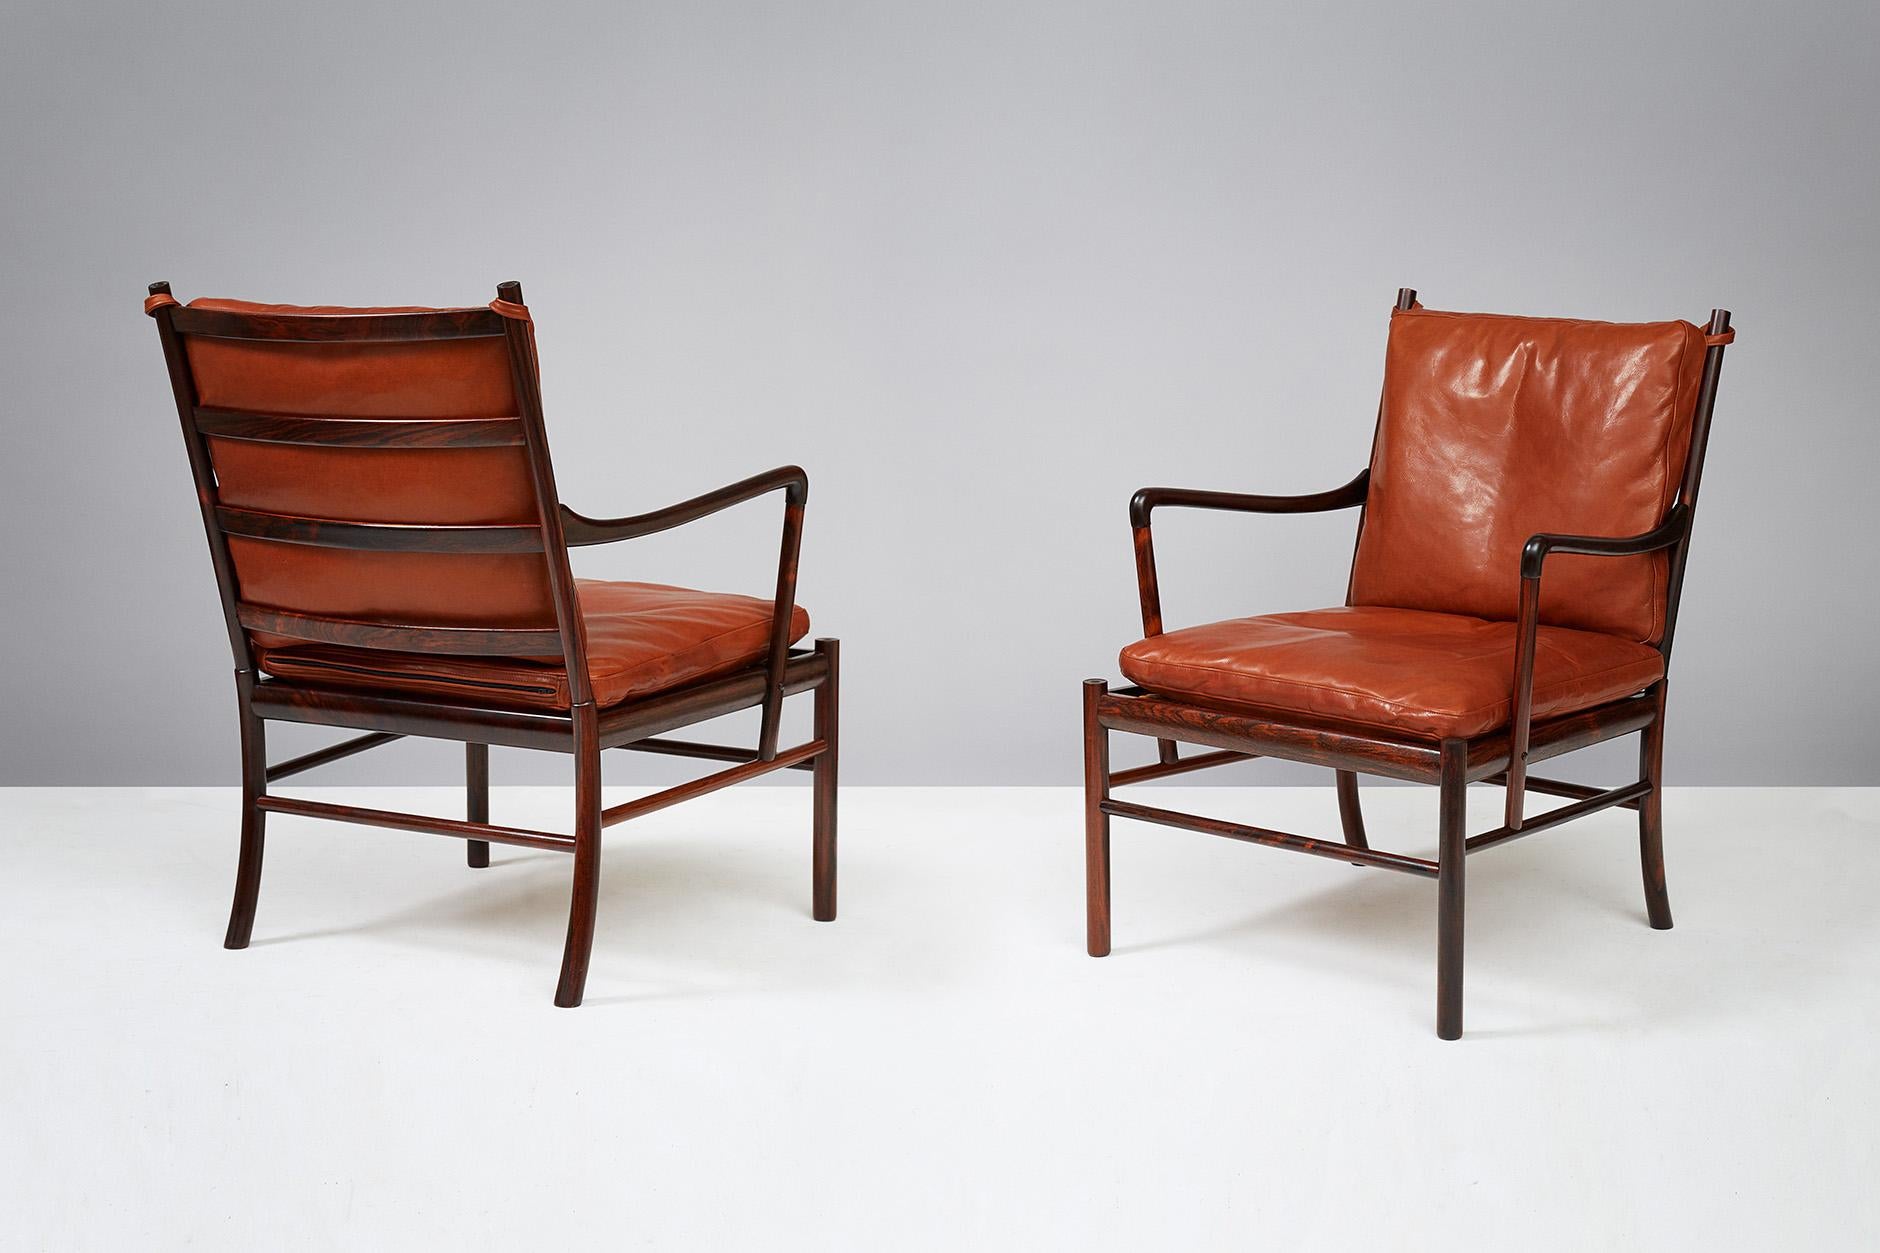 Ole Wanscher

PJ-149 Colonial chairs, 1949.

These examples made from Brazilian rosewood with woven rattan cane seats. Produced by Poul Jeppesen, Denmark, circa 1950s. Cognac brown aniline leather seat cushions with loose feather filling.